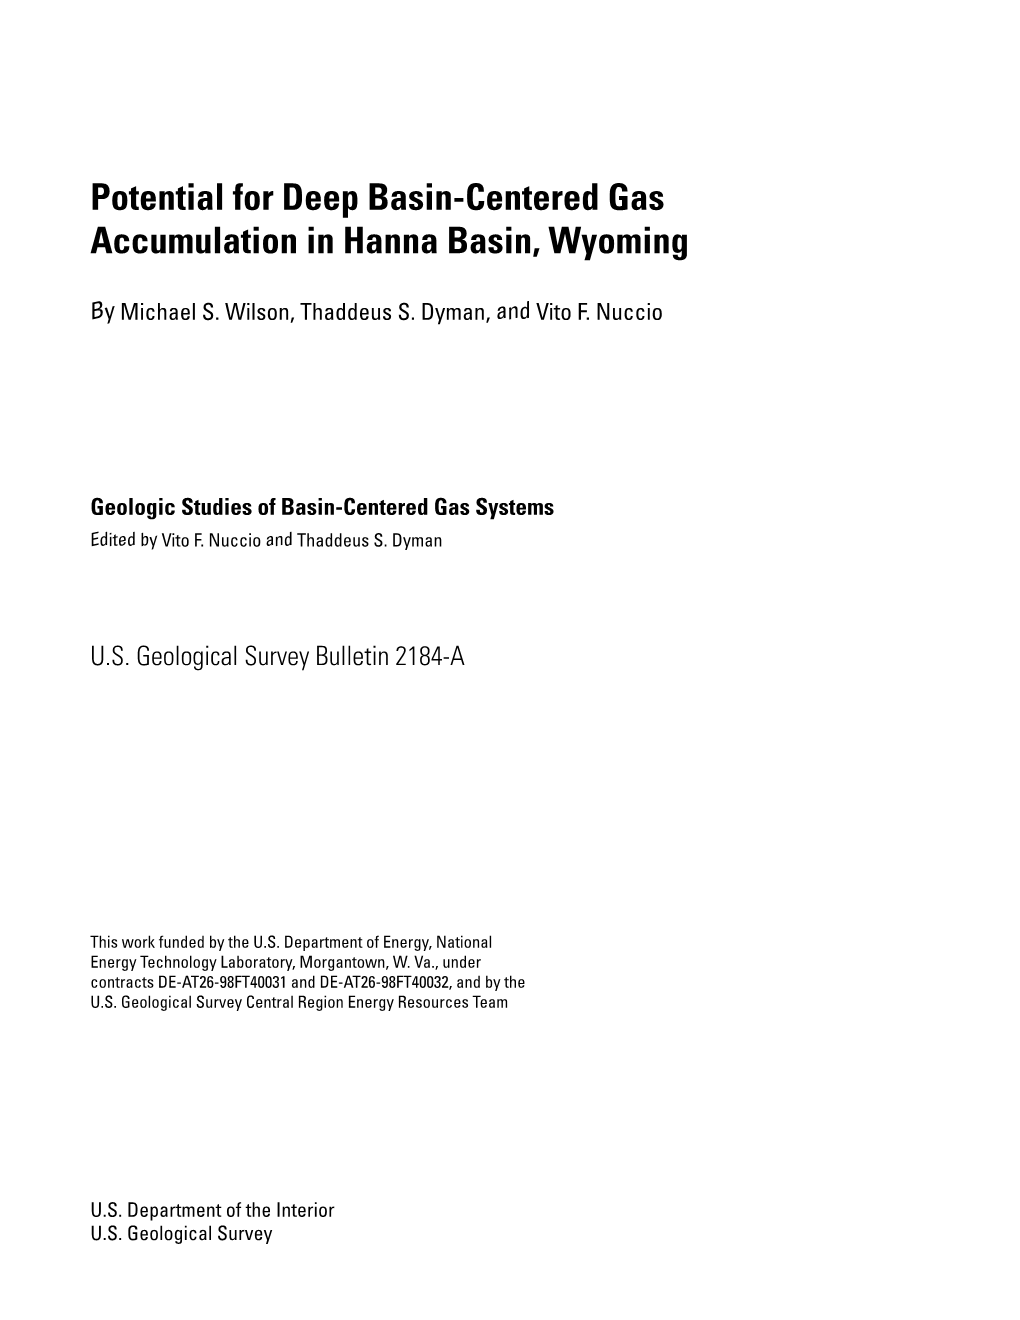 Potential for Deep Basin-Centered Gas Accumulation in Hanna Basin, Wyoming